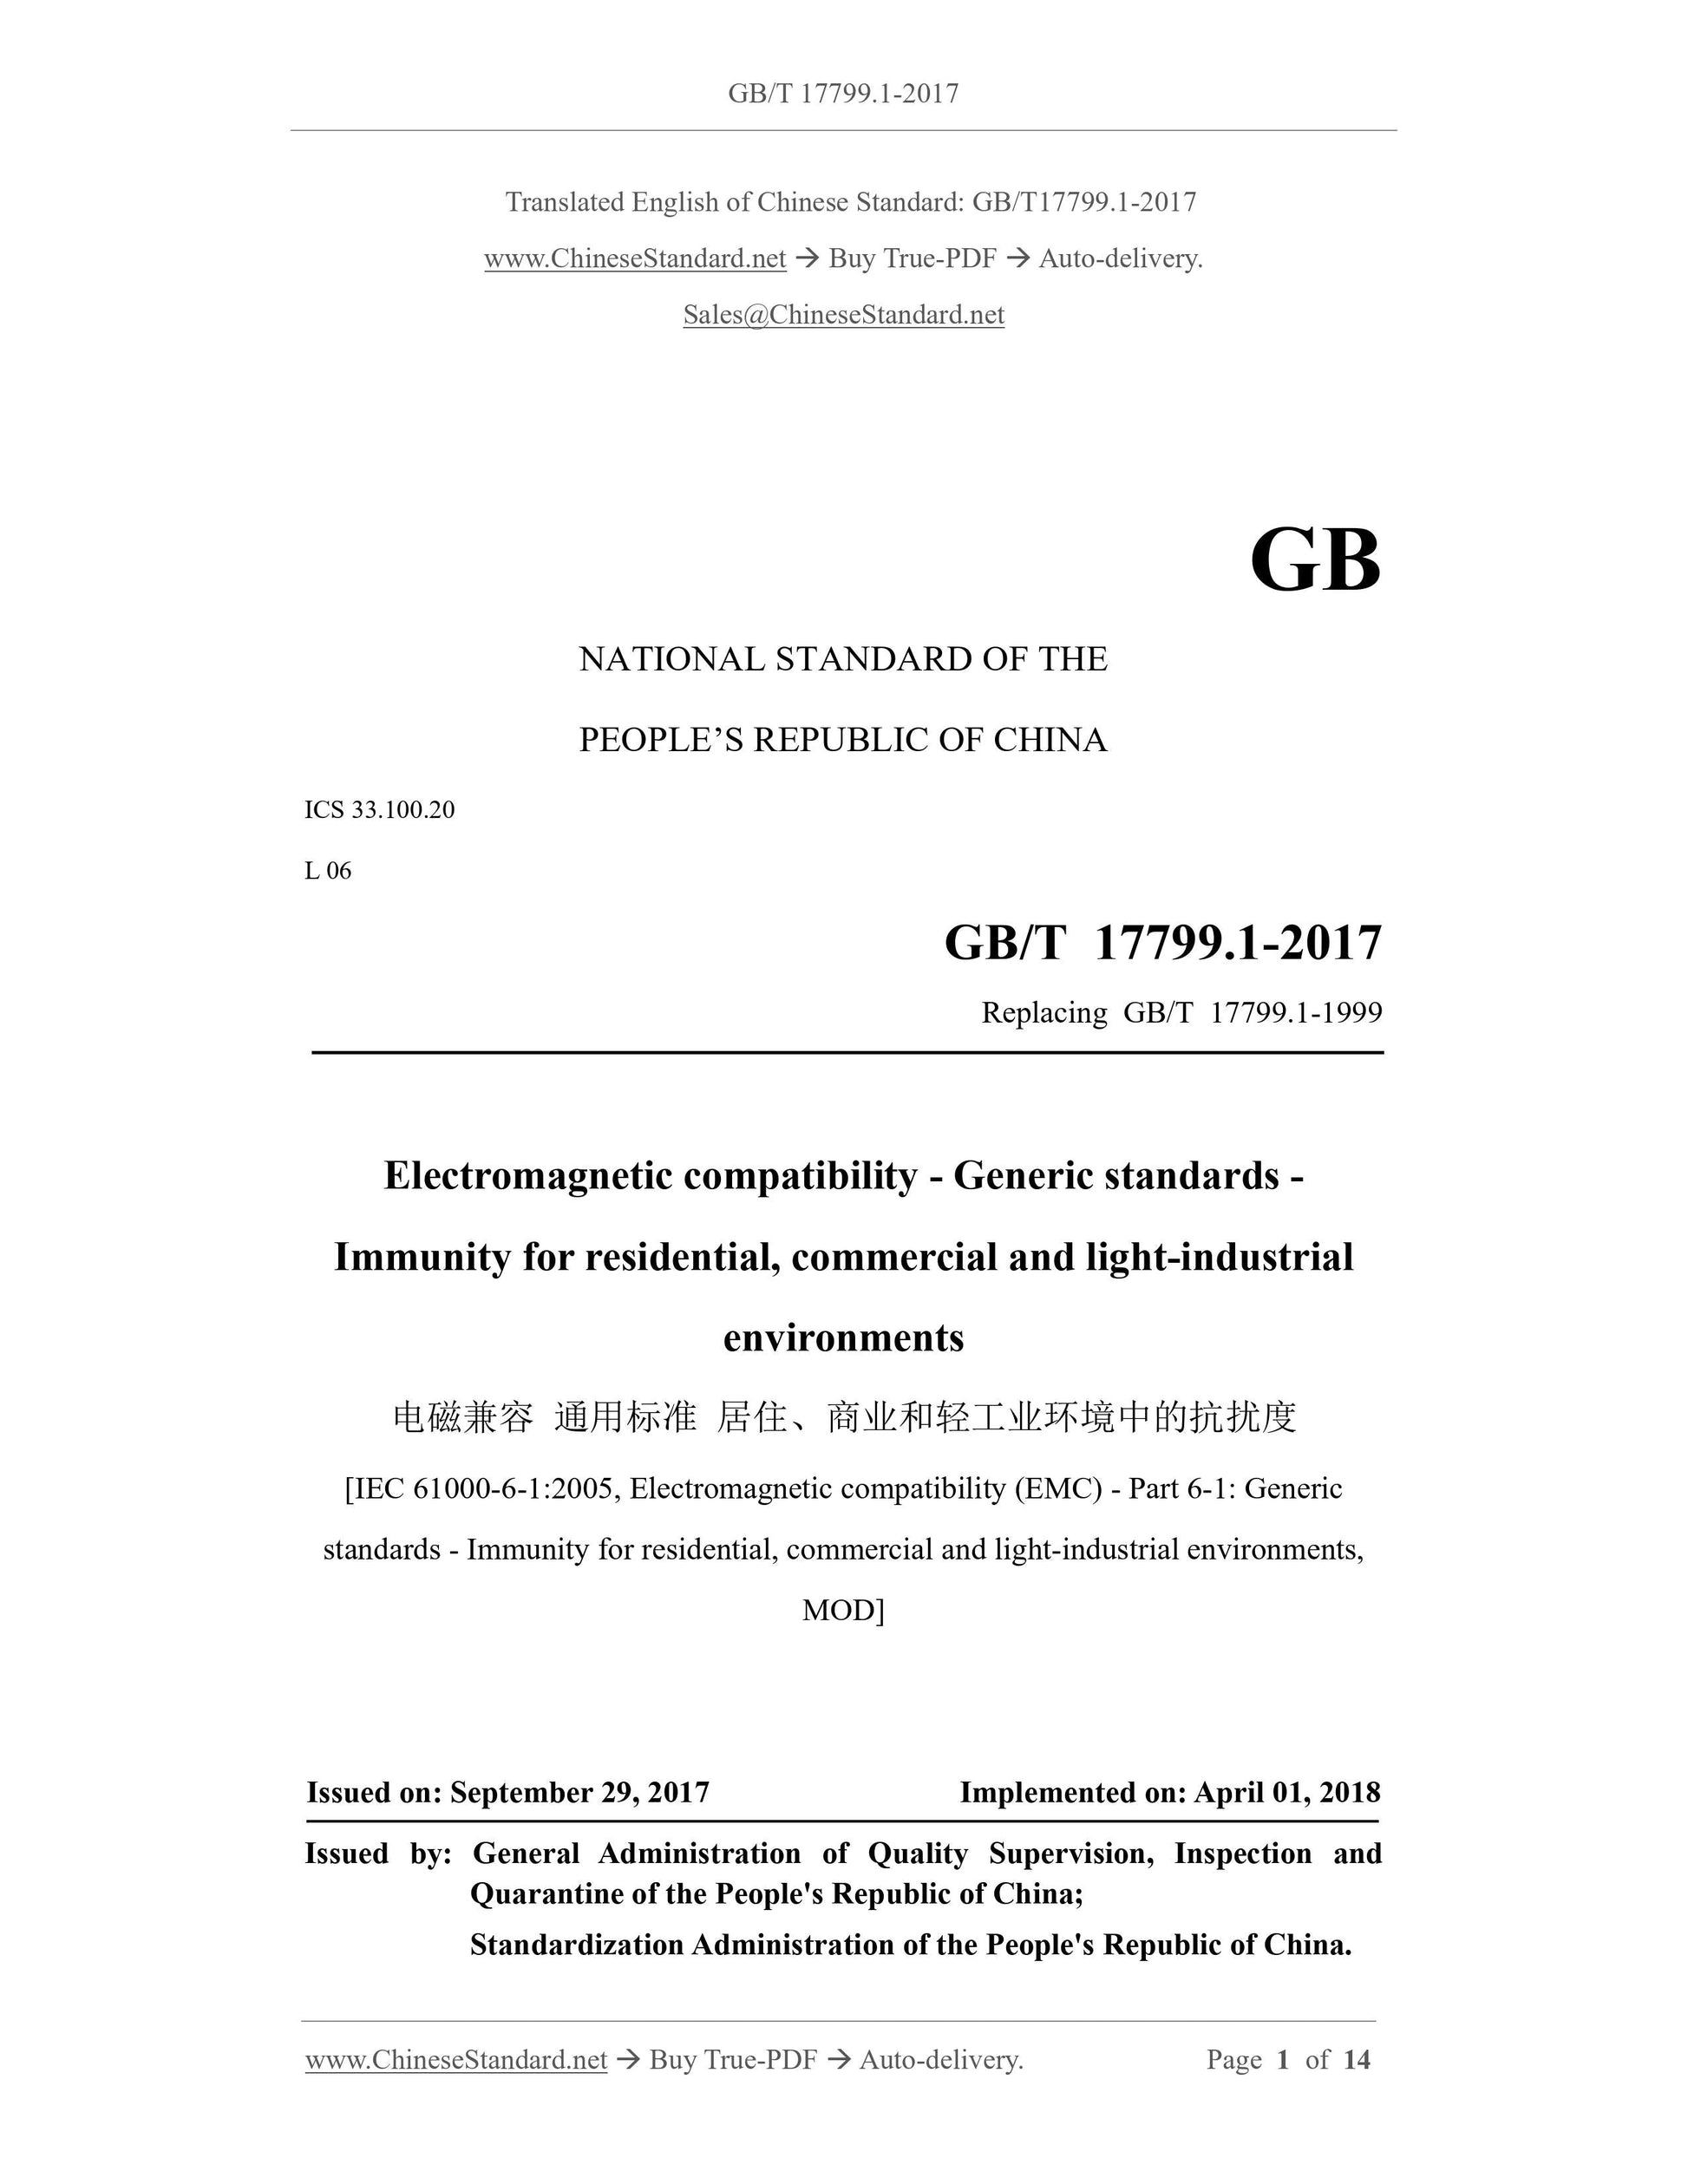 GB/T 17799.1-2017 Page 1